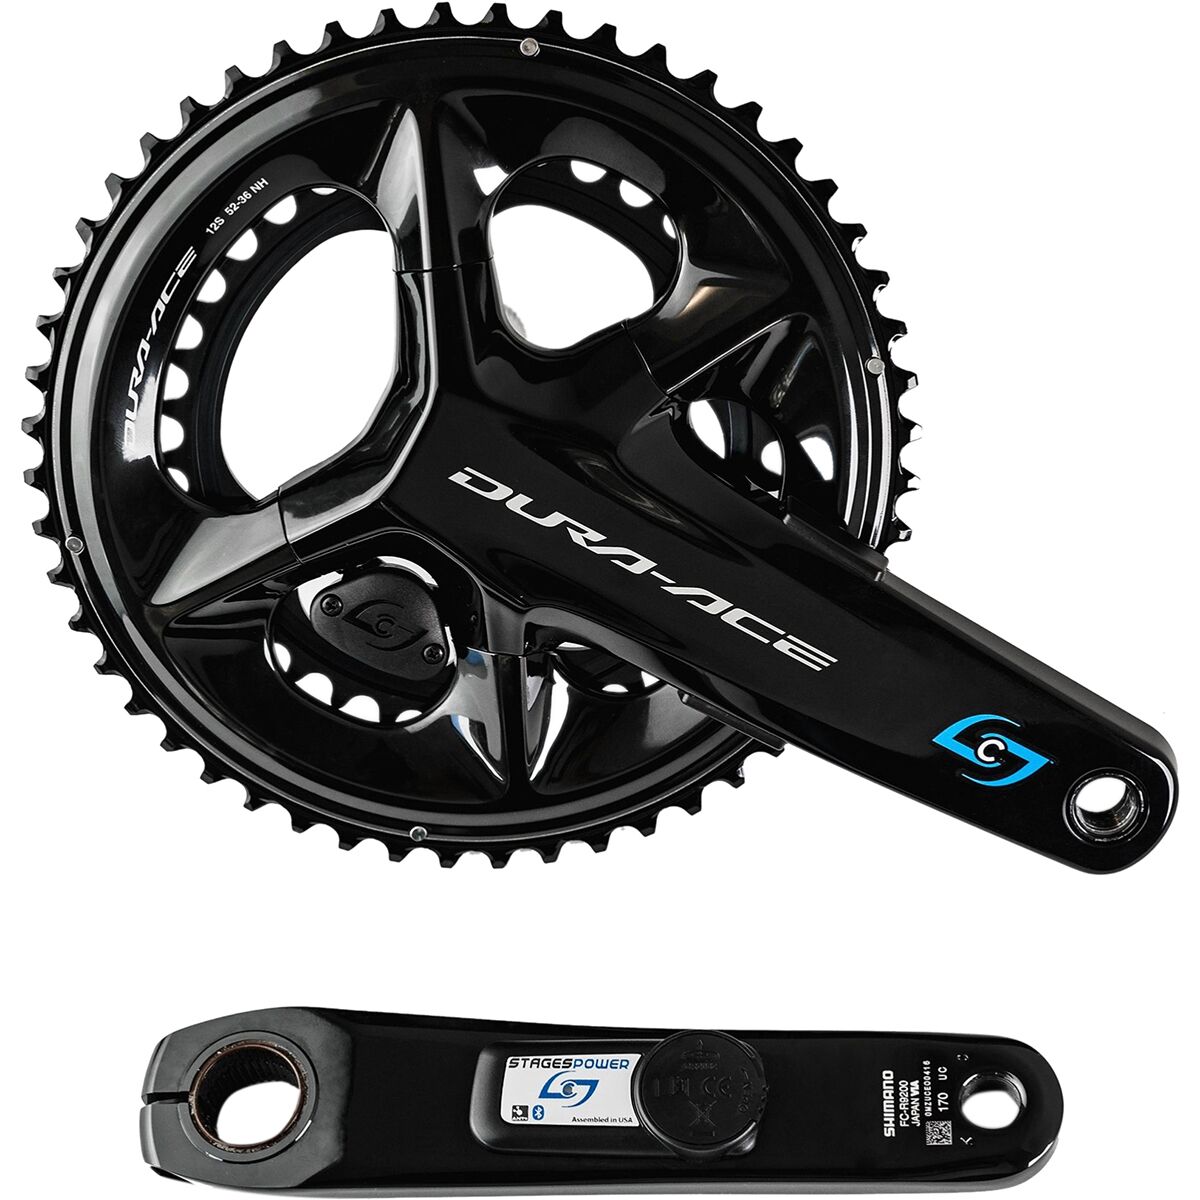 Stages Cycling Shimano Dura-Ace R9200 Gen 3 Dual-Sided Power Meter Crankset Black, 172.5mm, 50/34